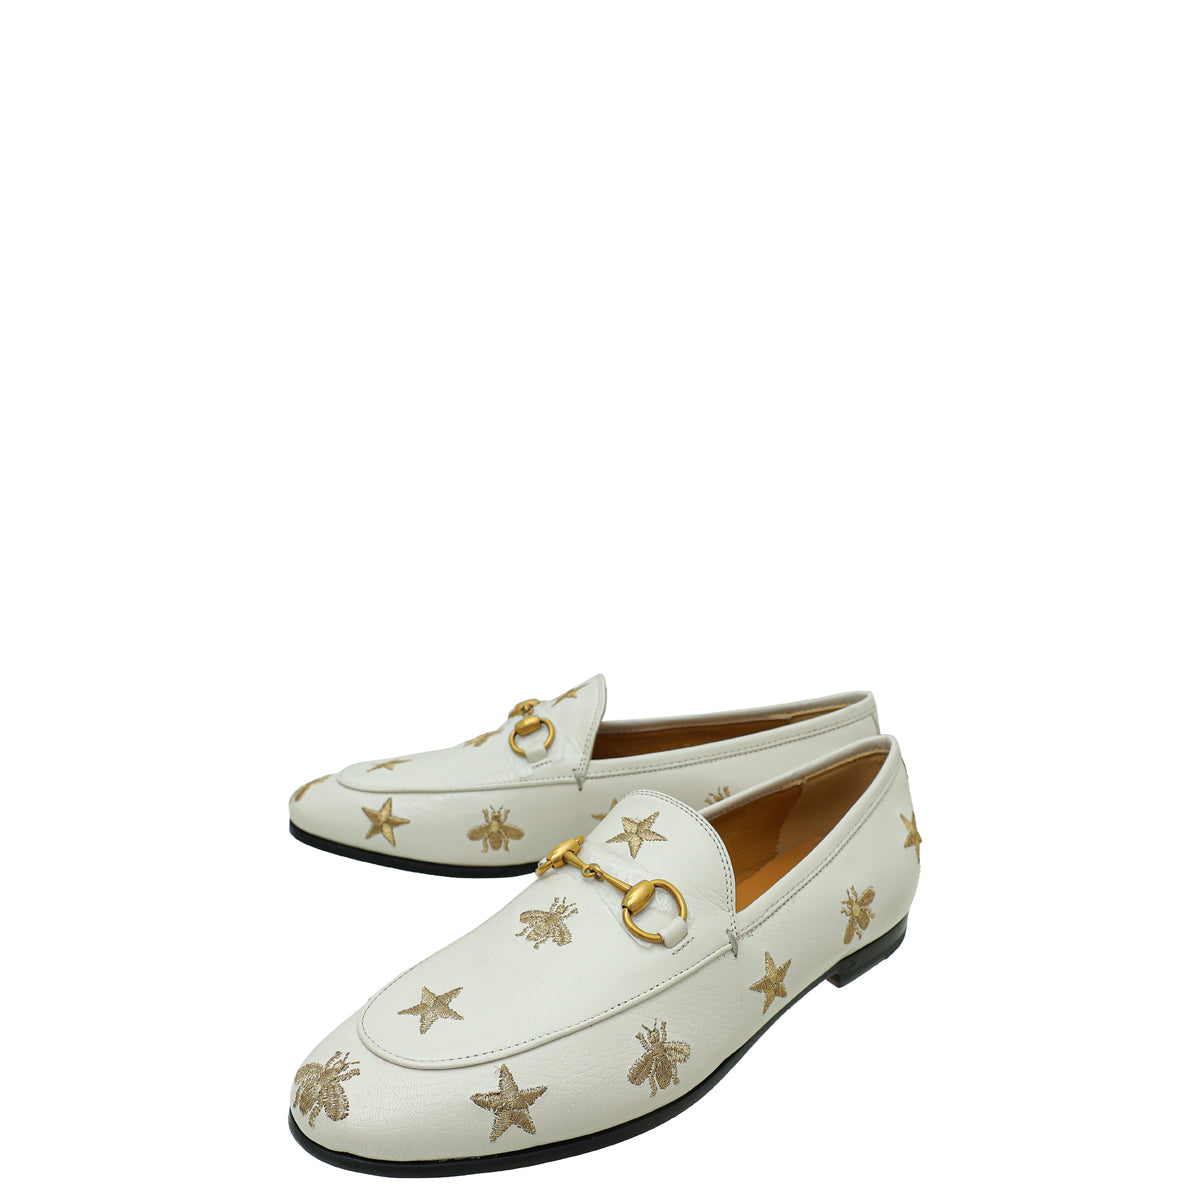 Gucci Mystic White Bee Star Embroidered Jordaan Horsebit Loafer 36.5